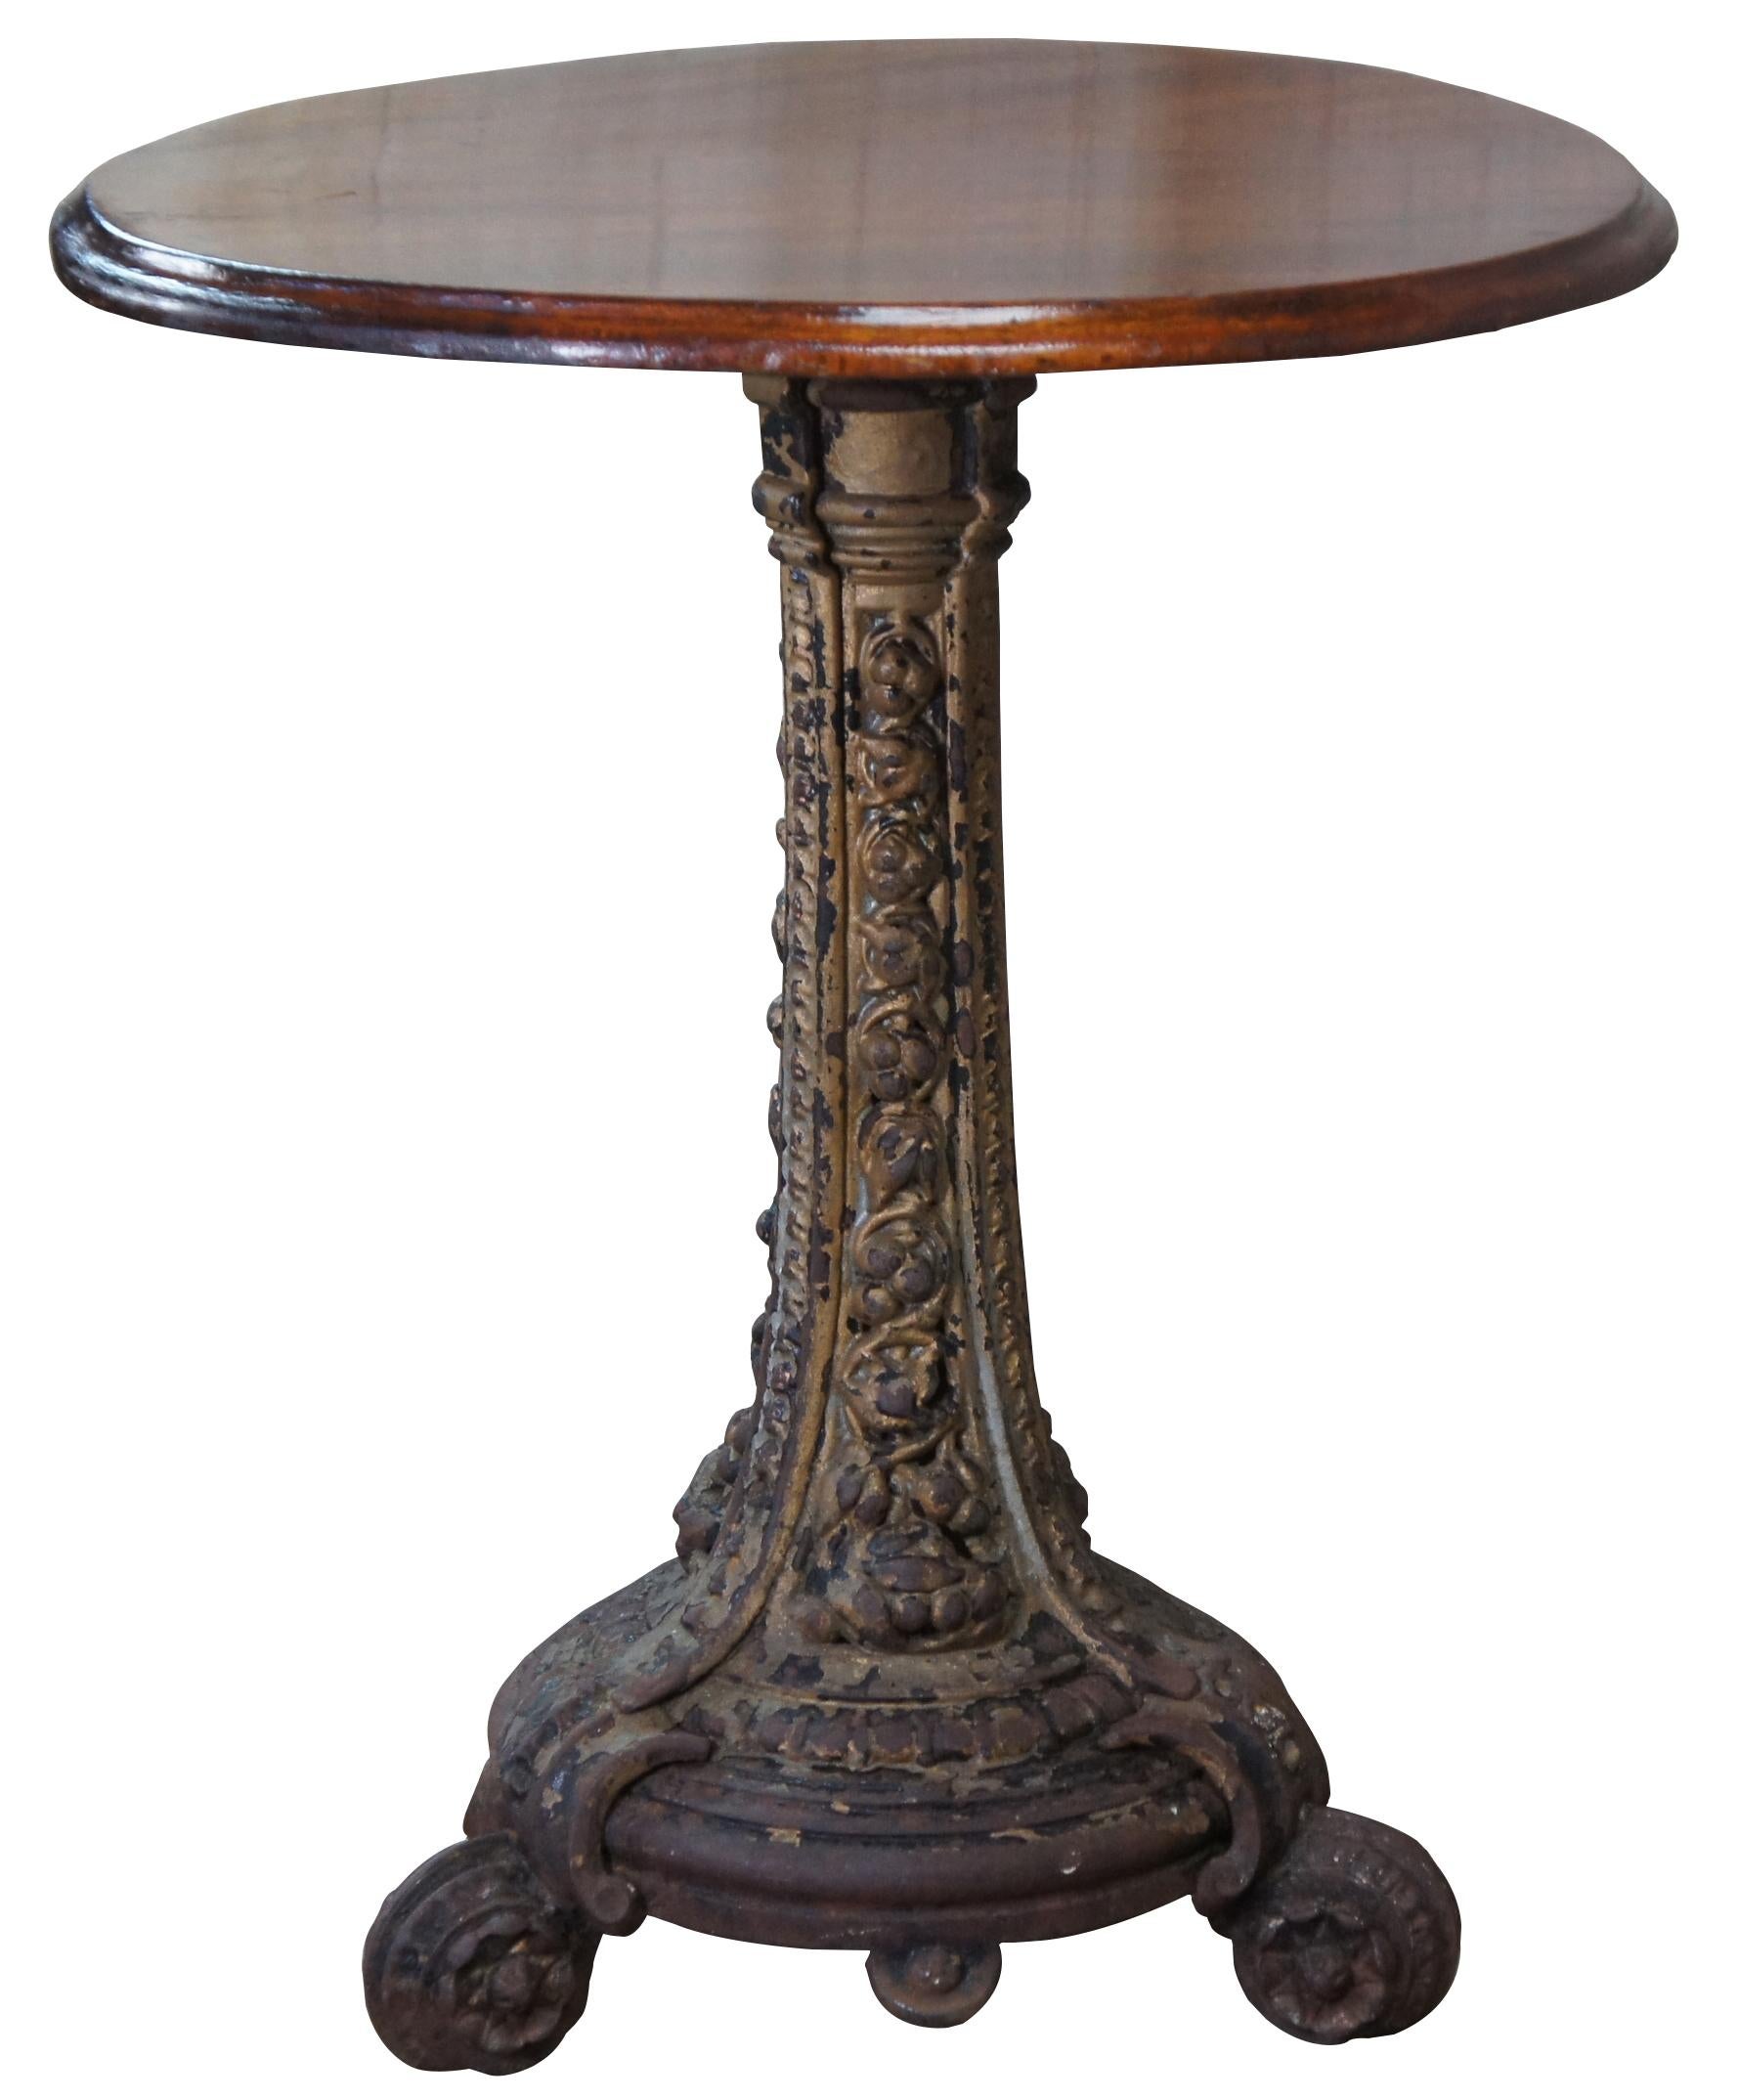 A lovely 19th century cast iron bistro or parlor table. Features a round mahogany top with ogee edge over low relief heavy floral pierced tripod base.

Measures: 24